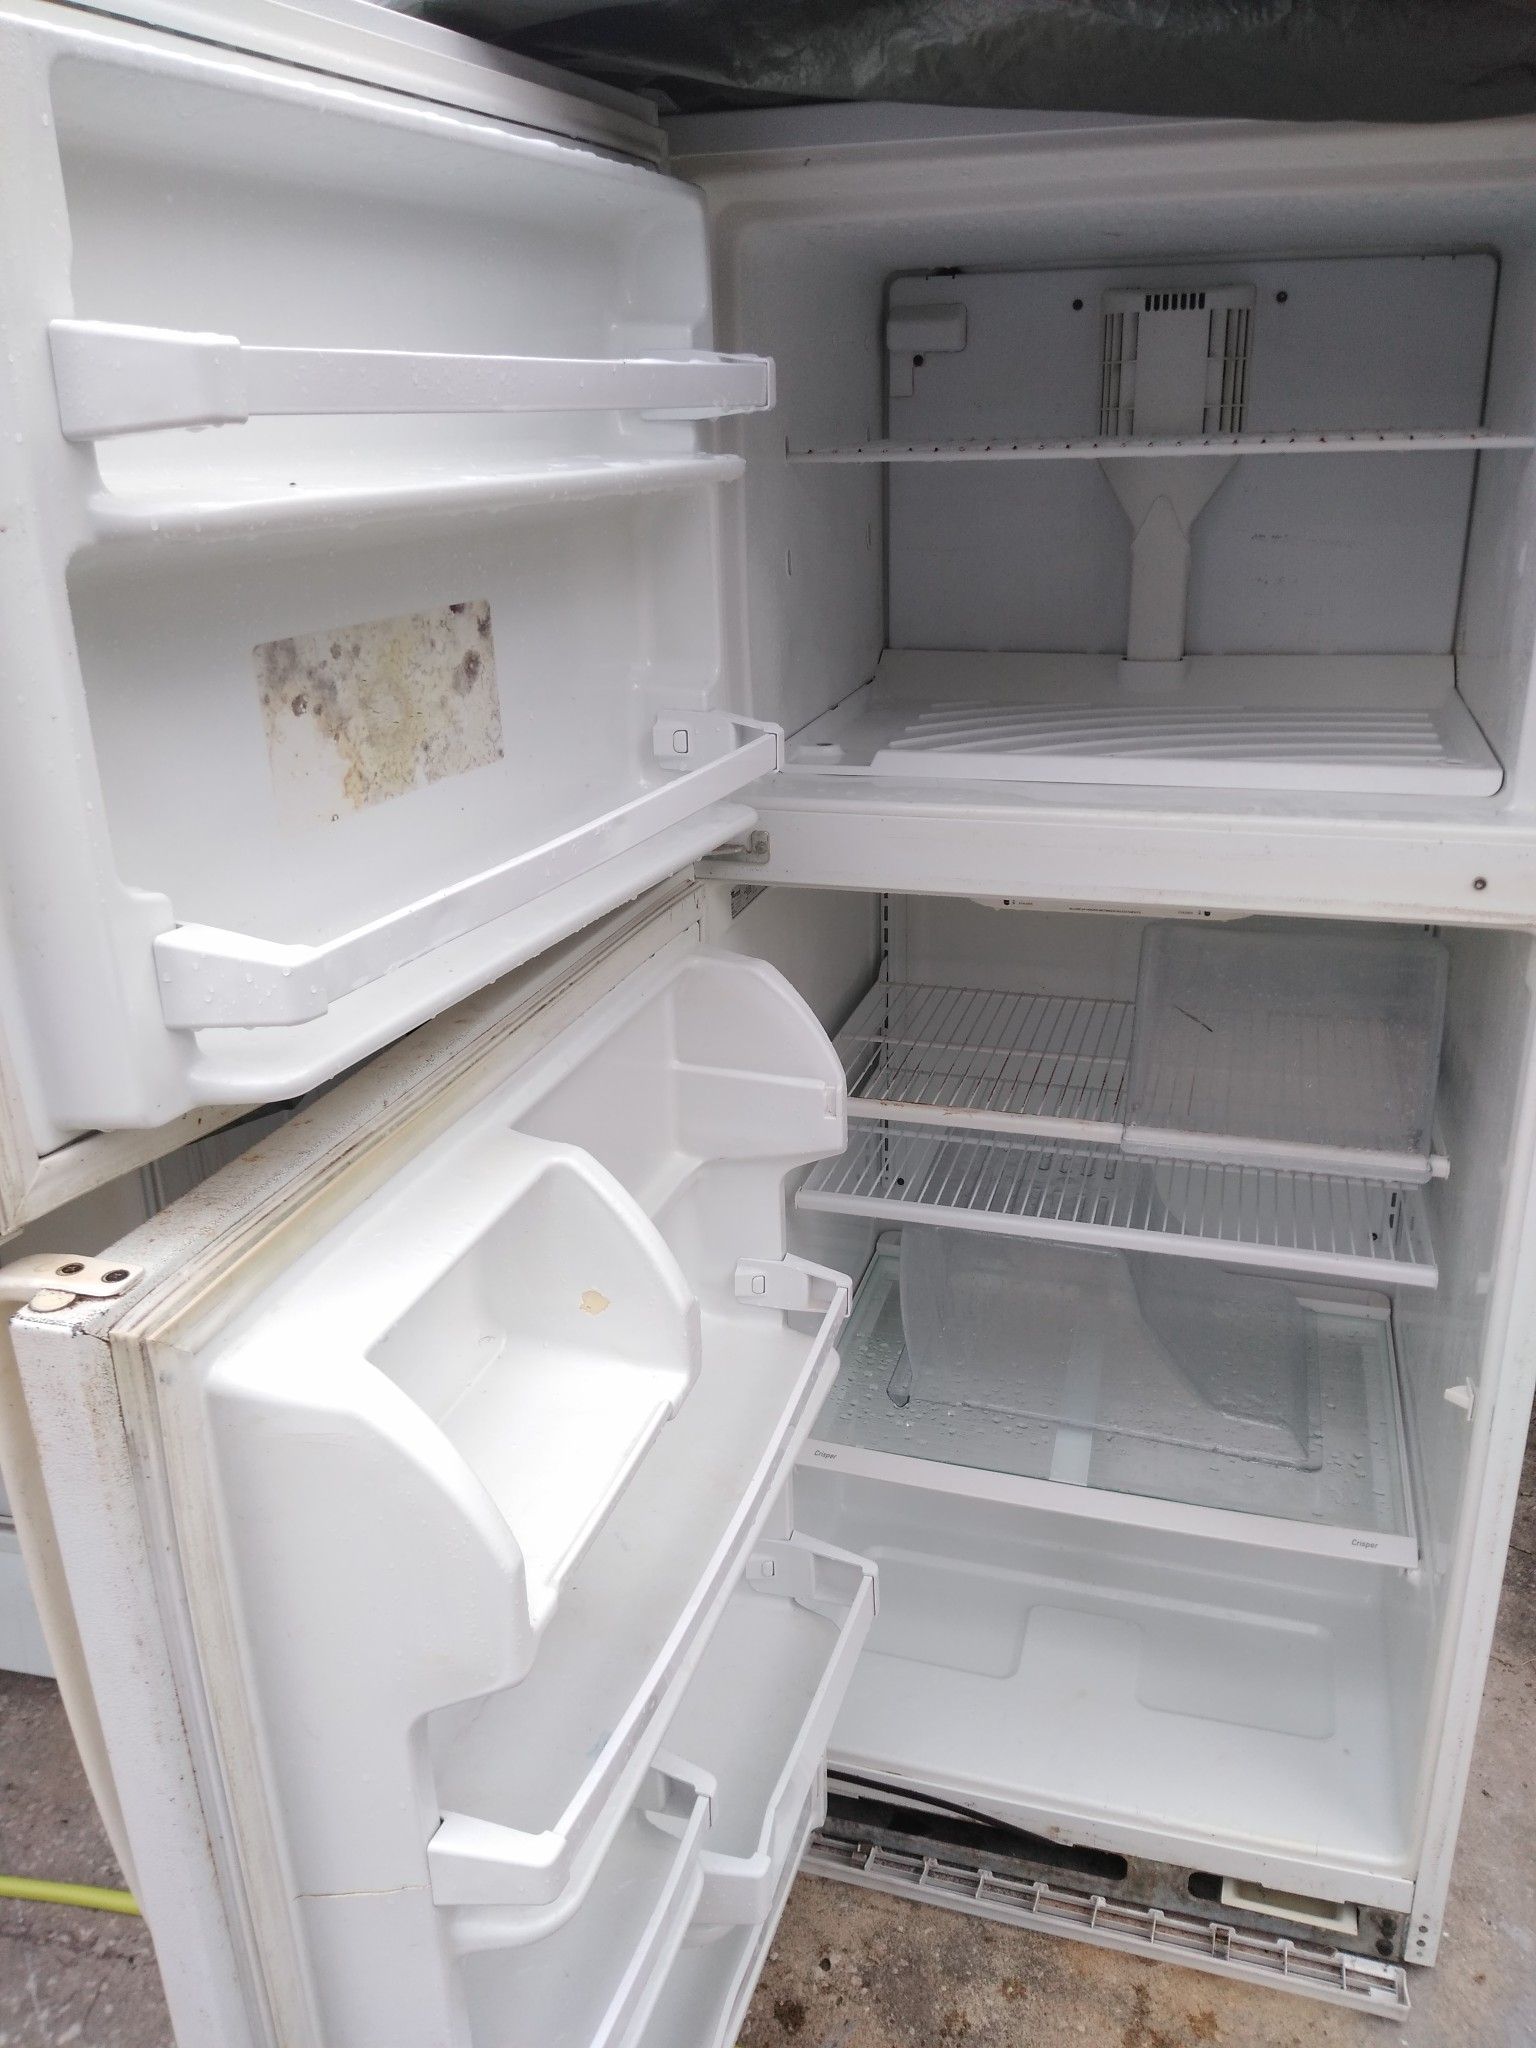 Whirlpool fridge for sale only $100